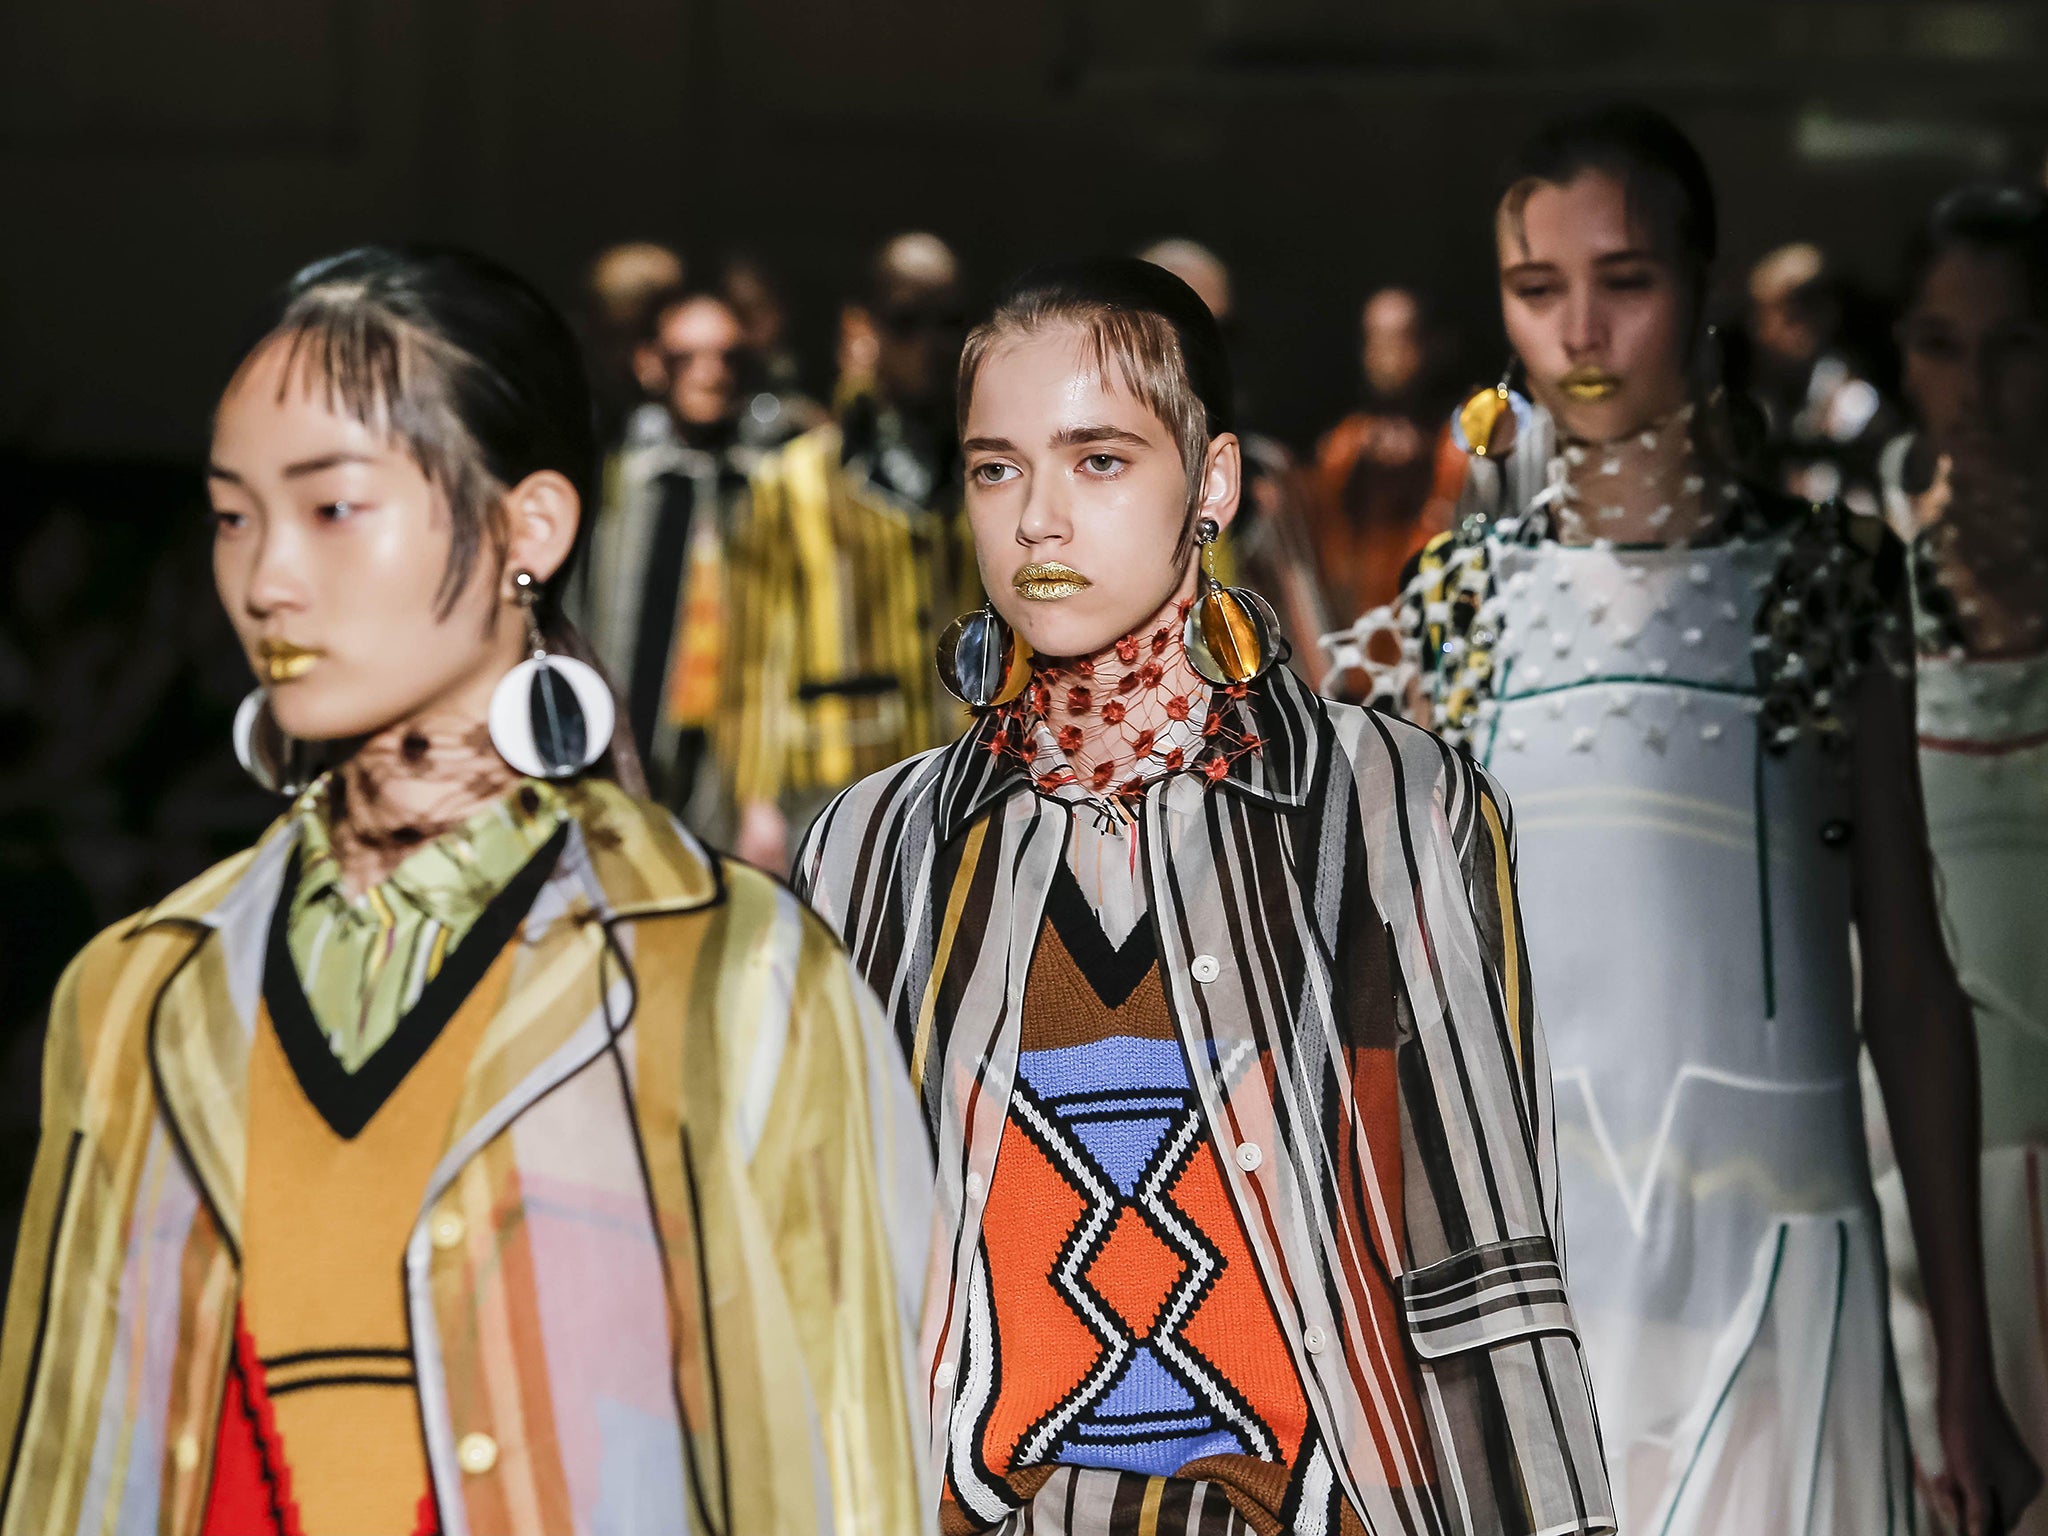 Miuccia Prada has more than enough talent to let her clothes speak for themselves